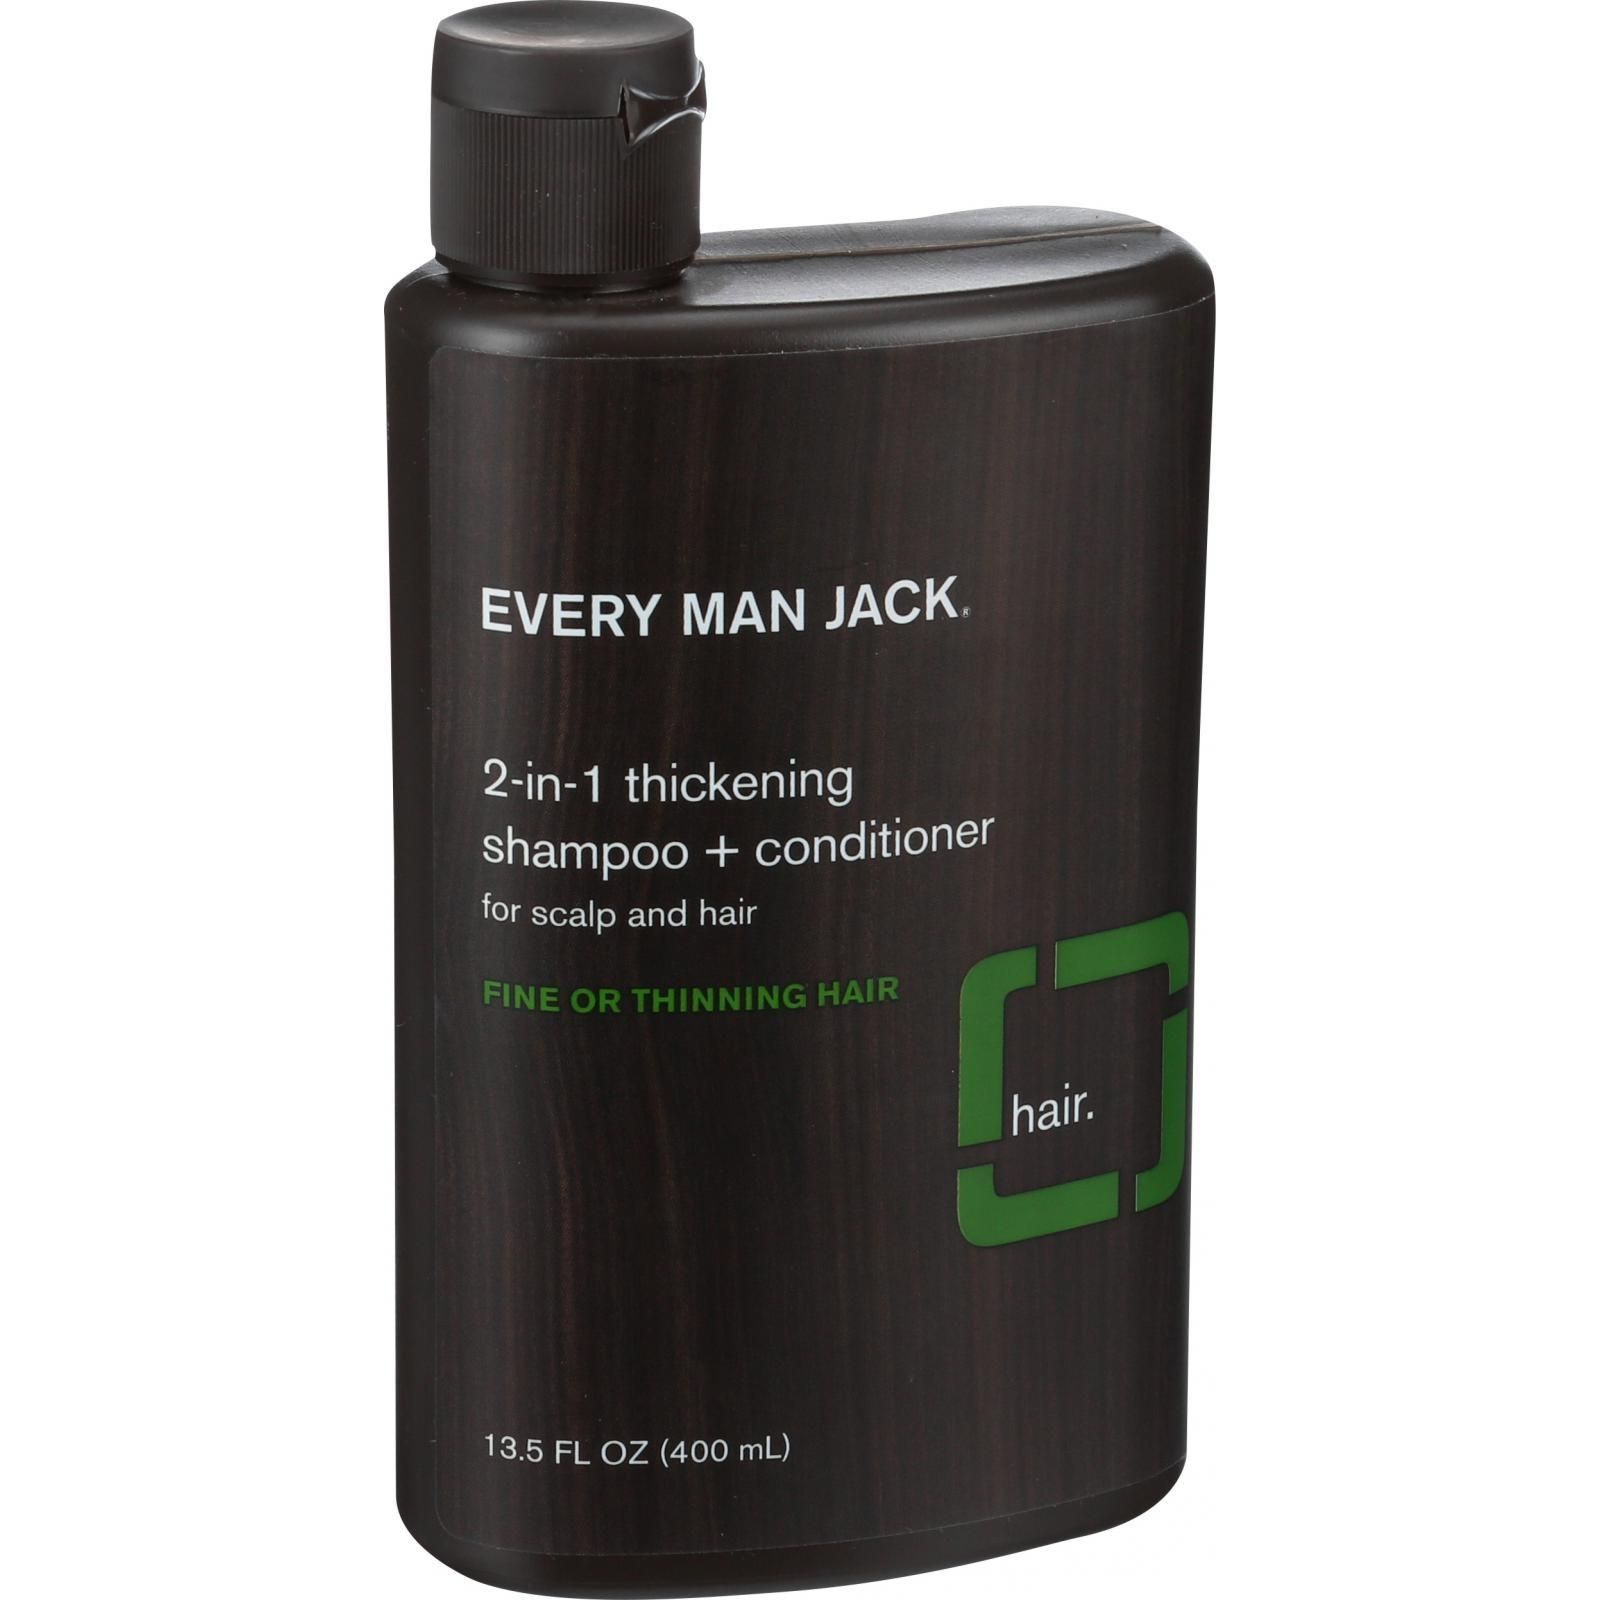 Every Man Jack 2 in 1 Thickening Shampoo plus Conditioner - Every Man  Jack0516476 | Vitality Medical